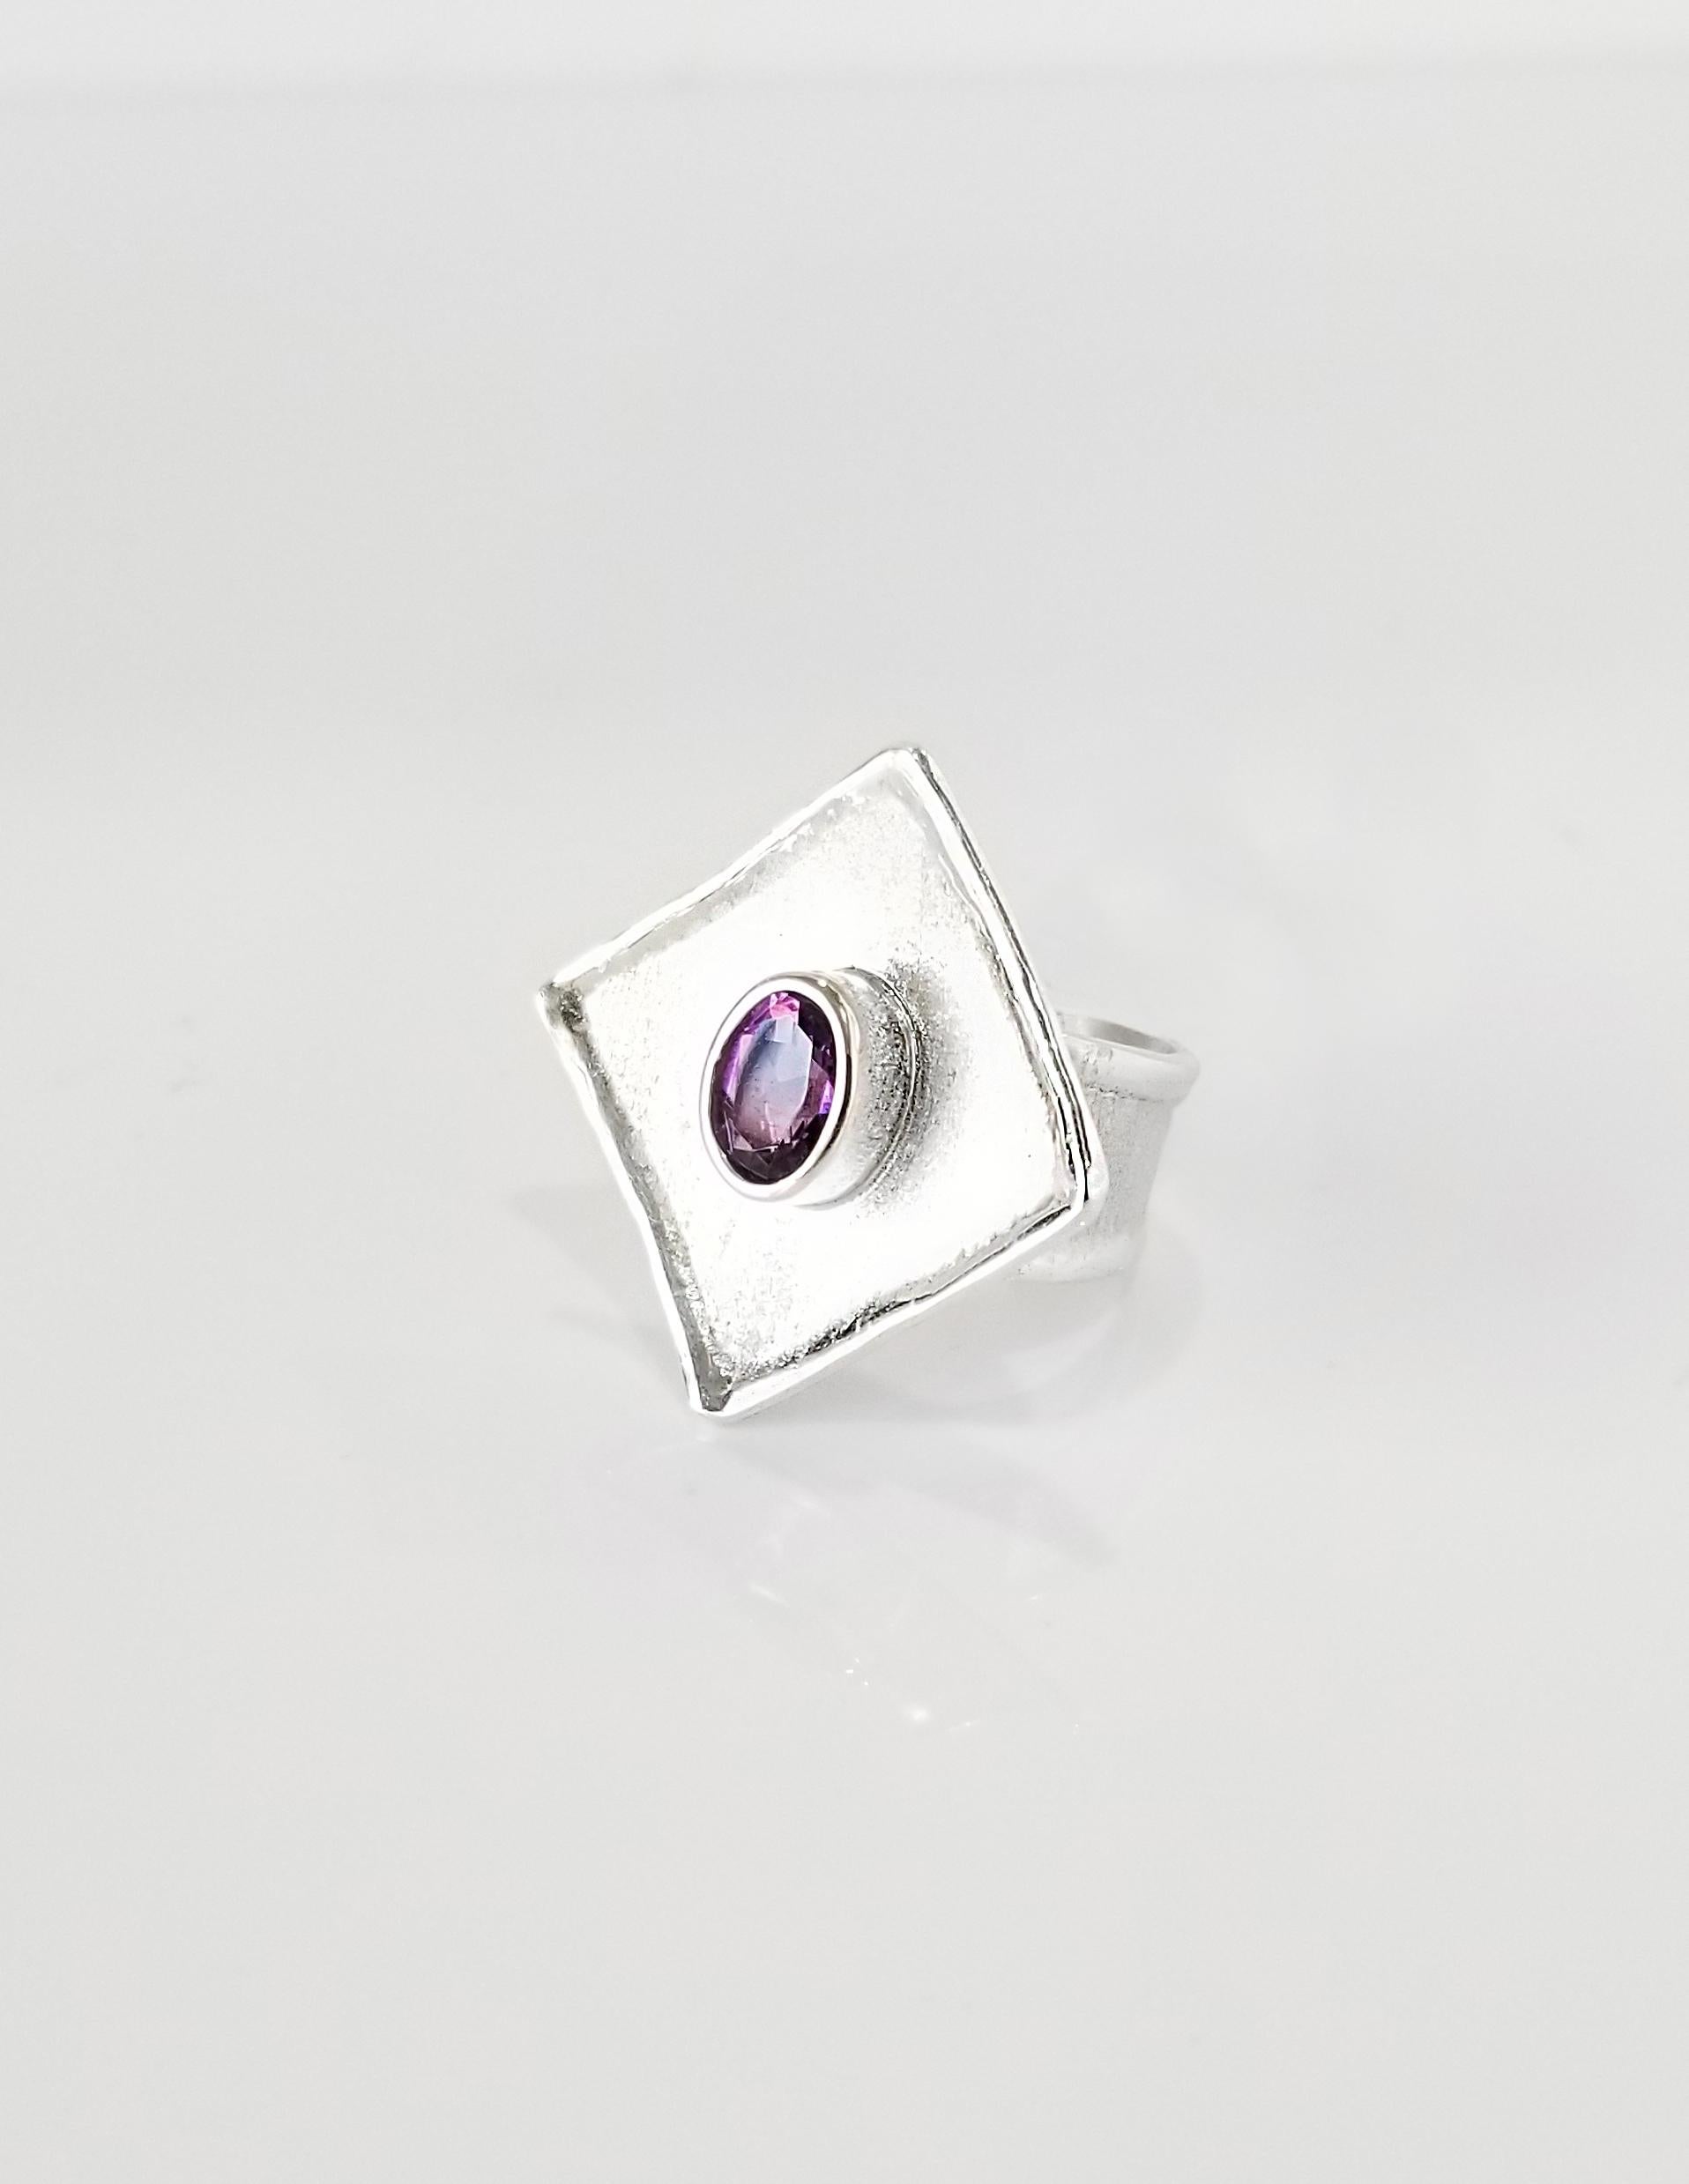 Geometric Yianni Creations gorgeous ring from Ammos Collection all handmade from fine silver 950 purity and plated with palladium to resist the elements. The beautiful ring is featuring 1.25 Carat Amethyst complemented by unique techniques of